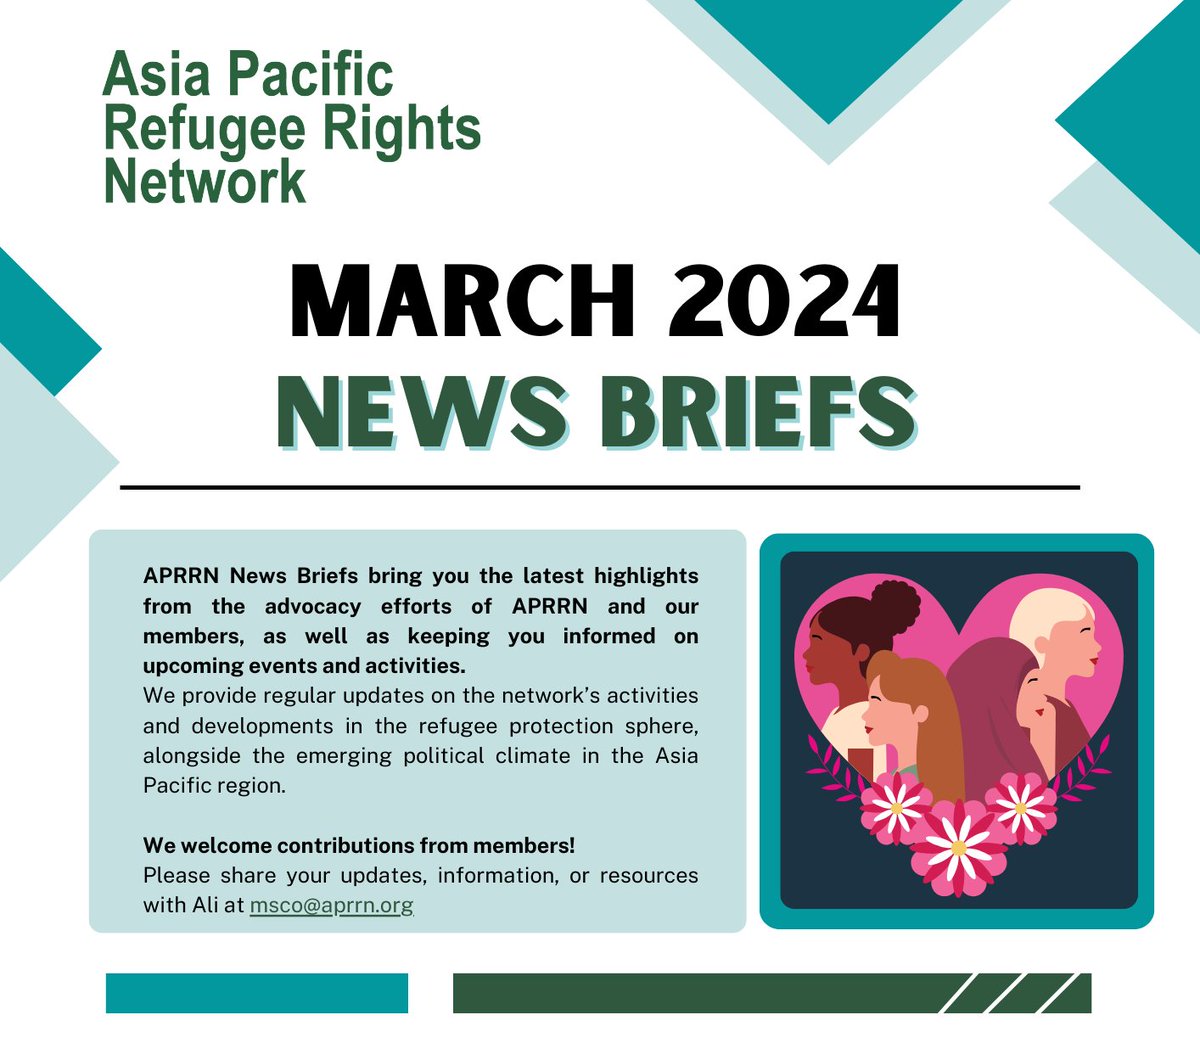 NEWS BRIEFS (MARCH 2024)

Our News Briefs bring you the latest highlights from the advocacy efforts of APRRN and our members. 

aprrn.org/newsletter-det…

#APRRN #Newsletter #Refugees #Advocacy #RefugeeRights